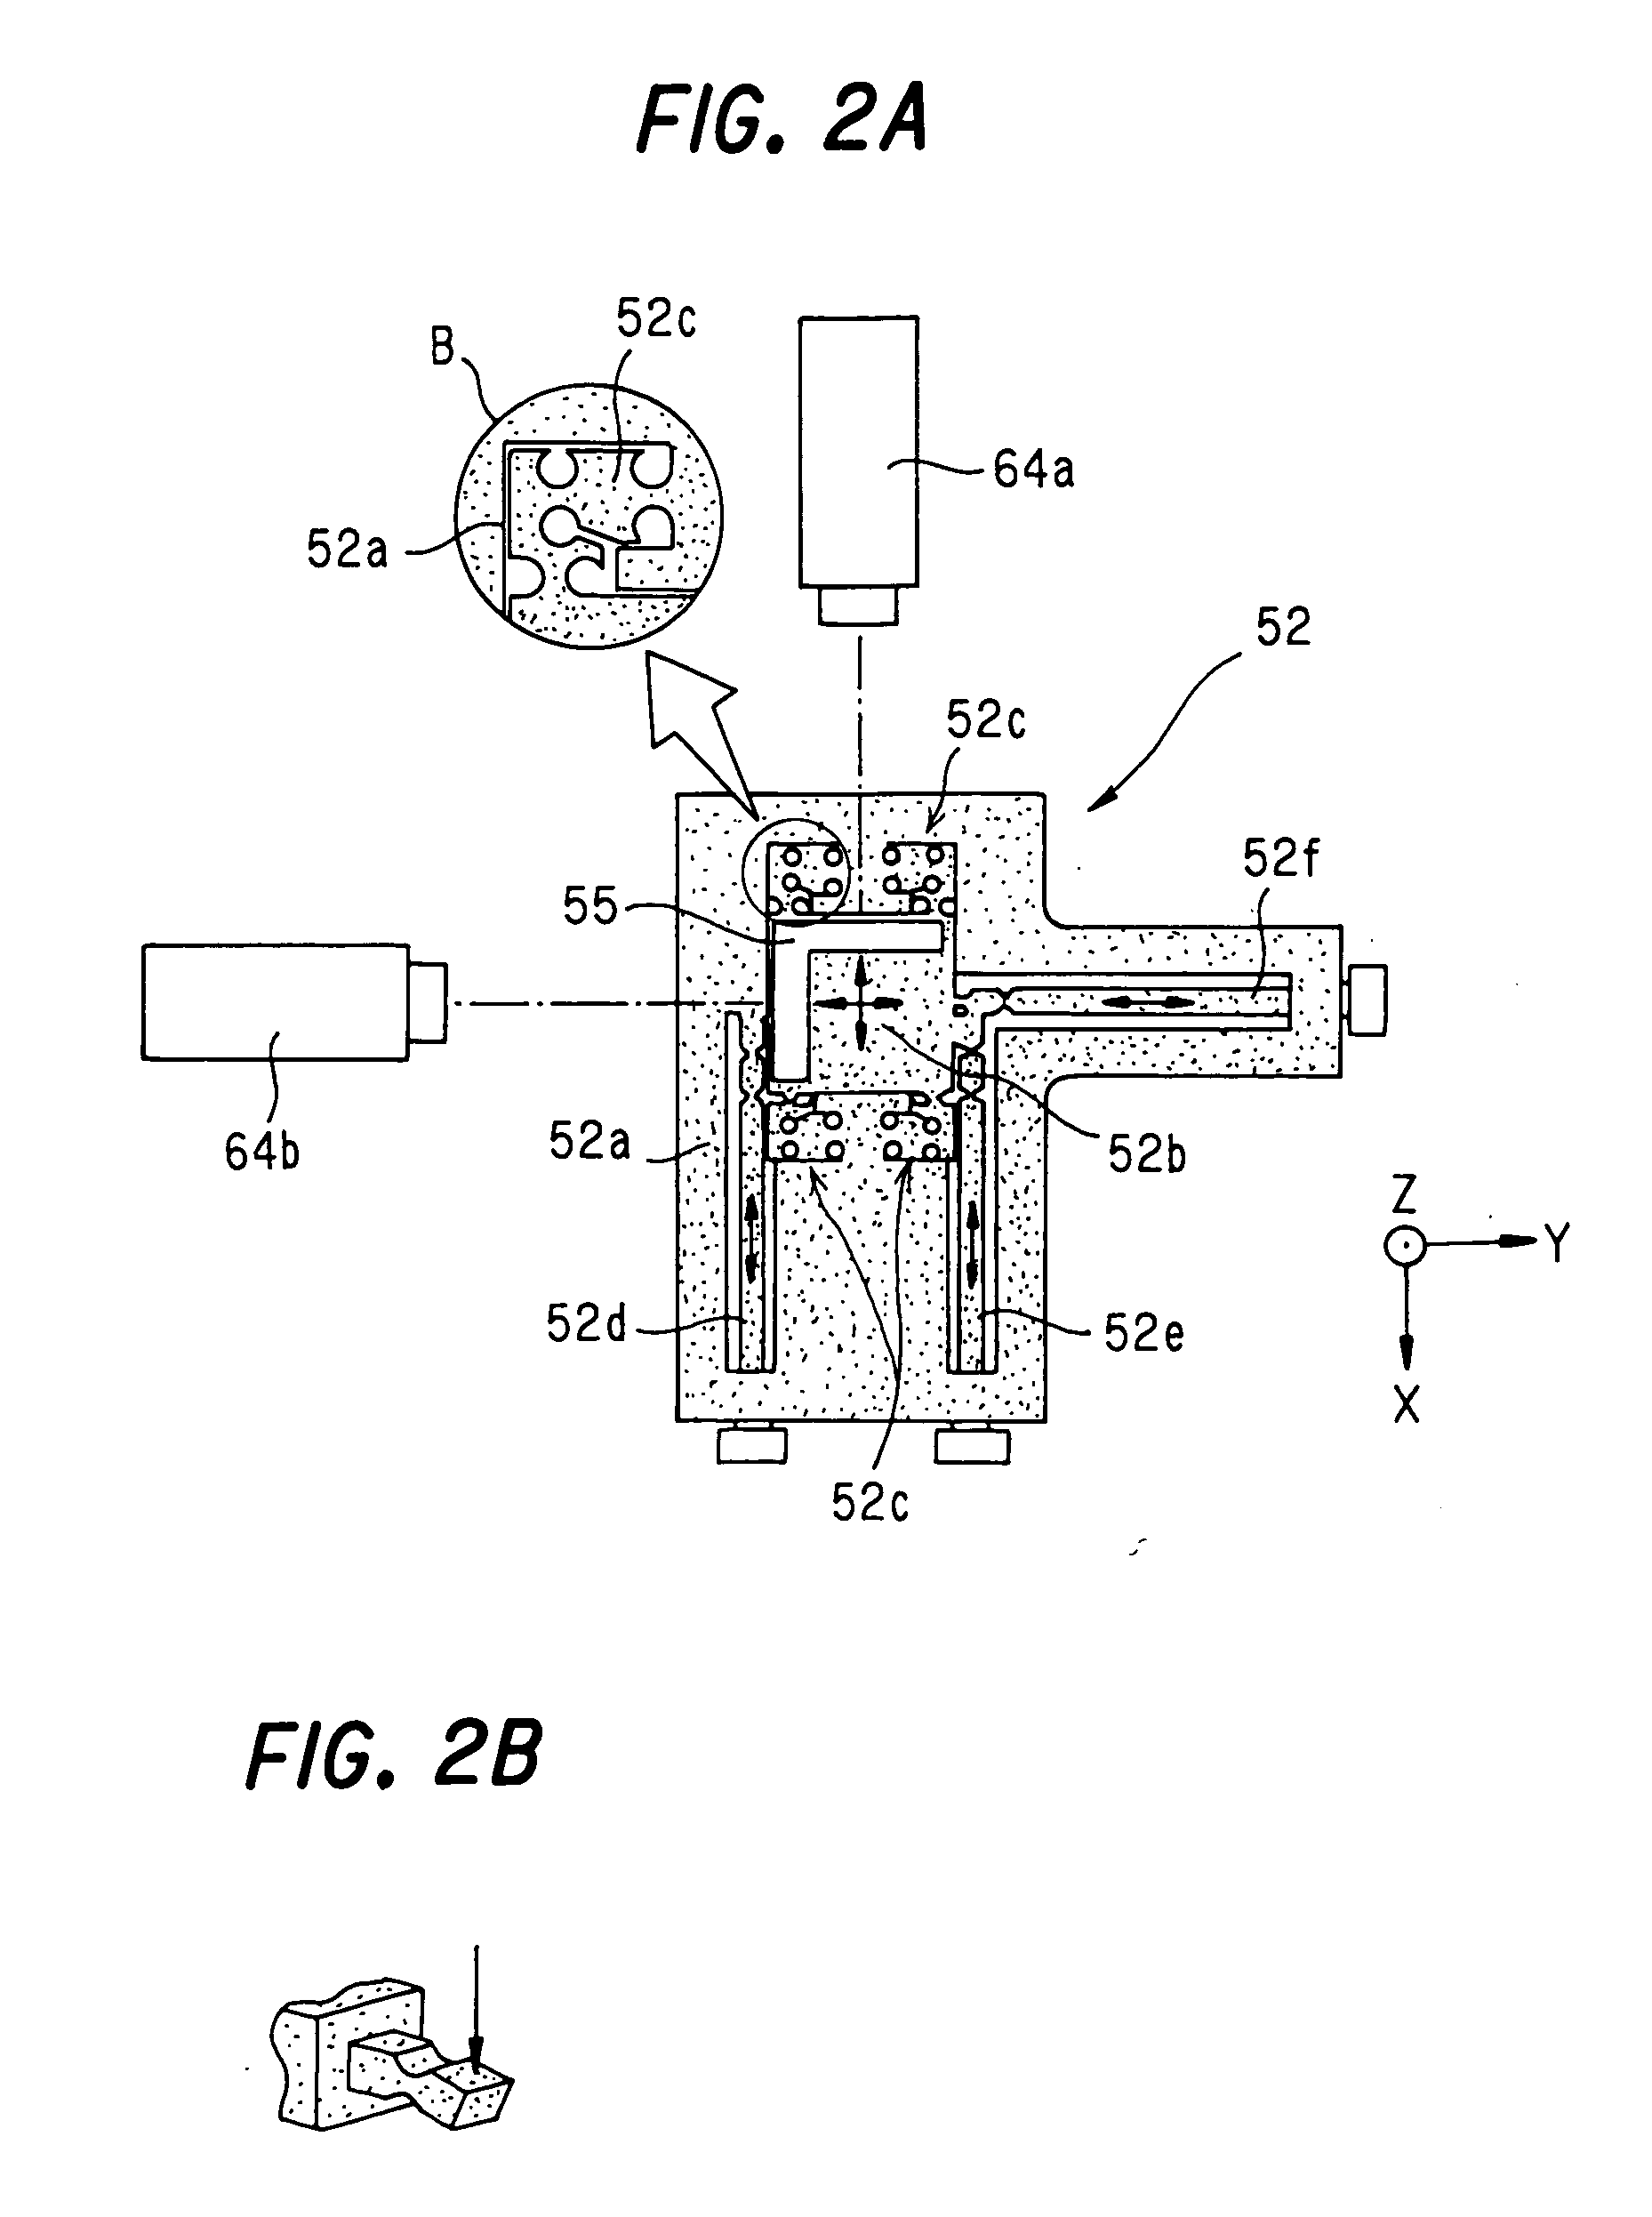 Manufacturing system for microstructure